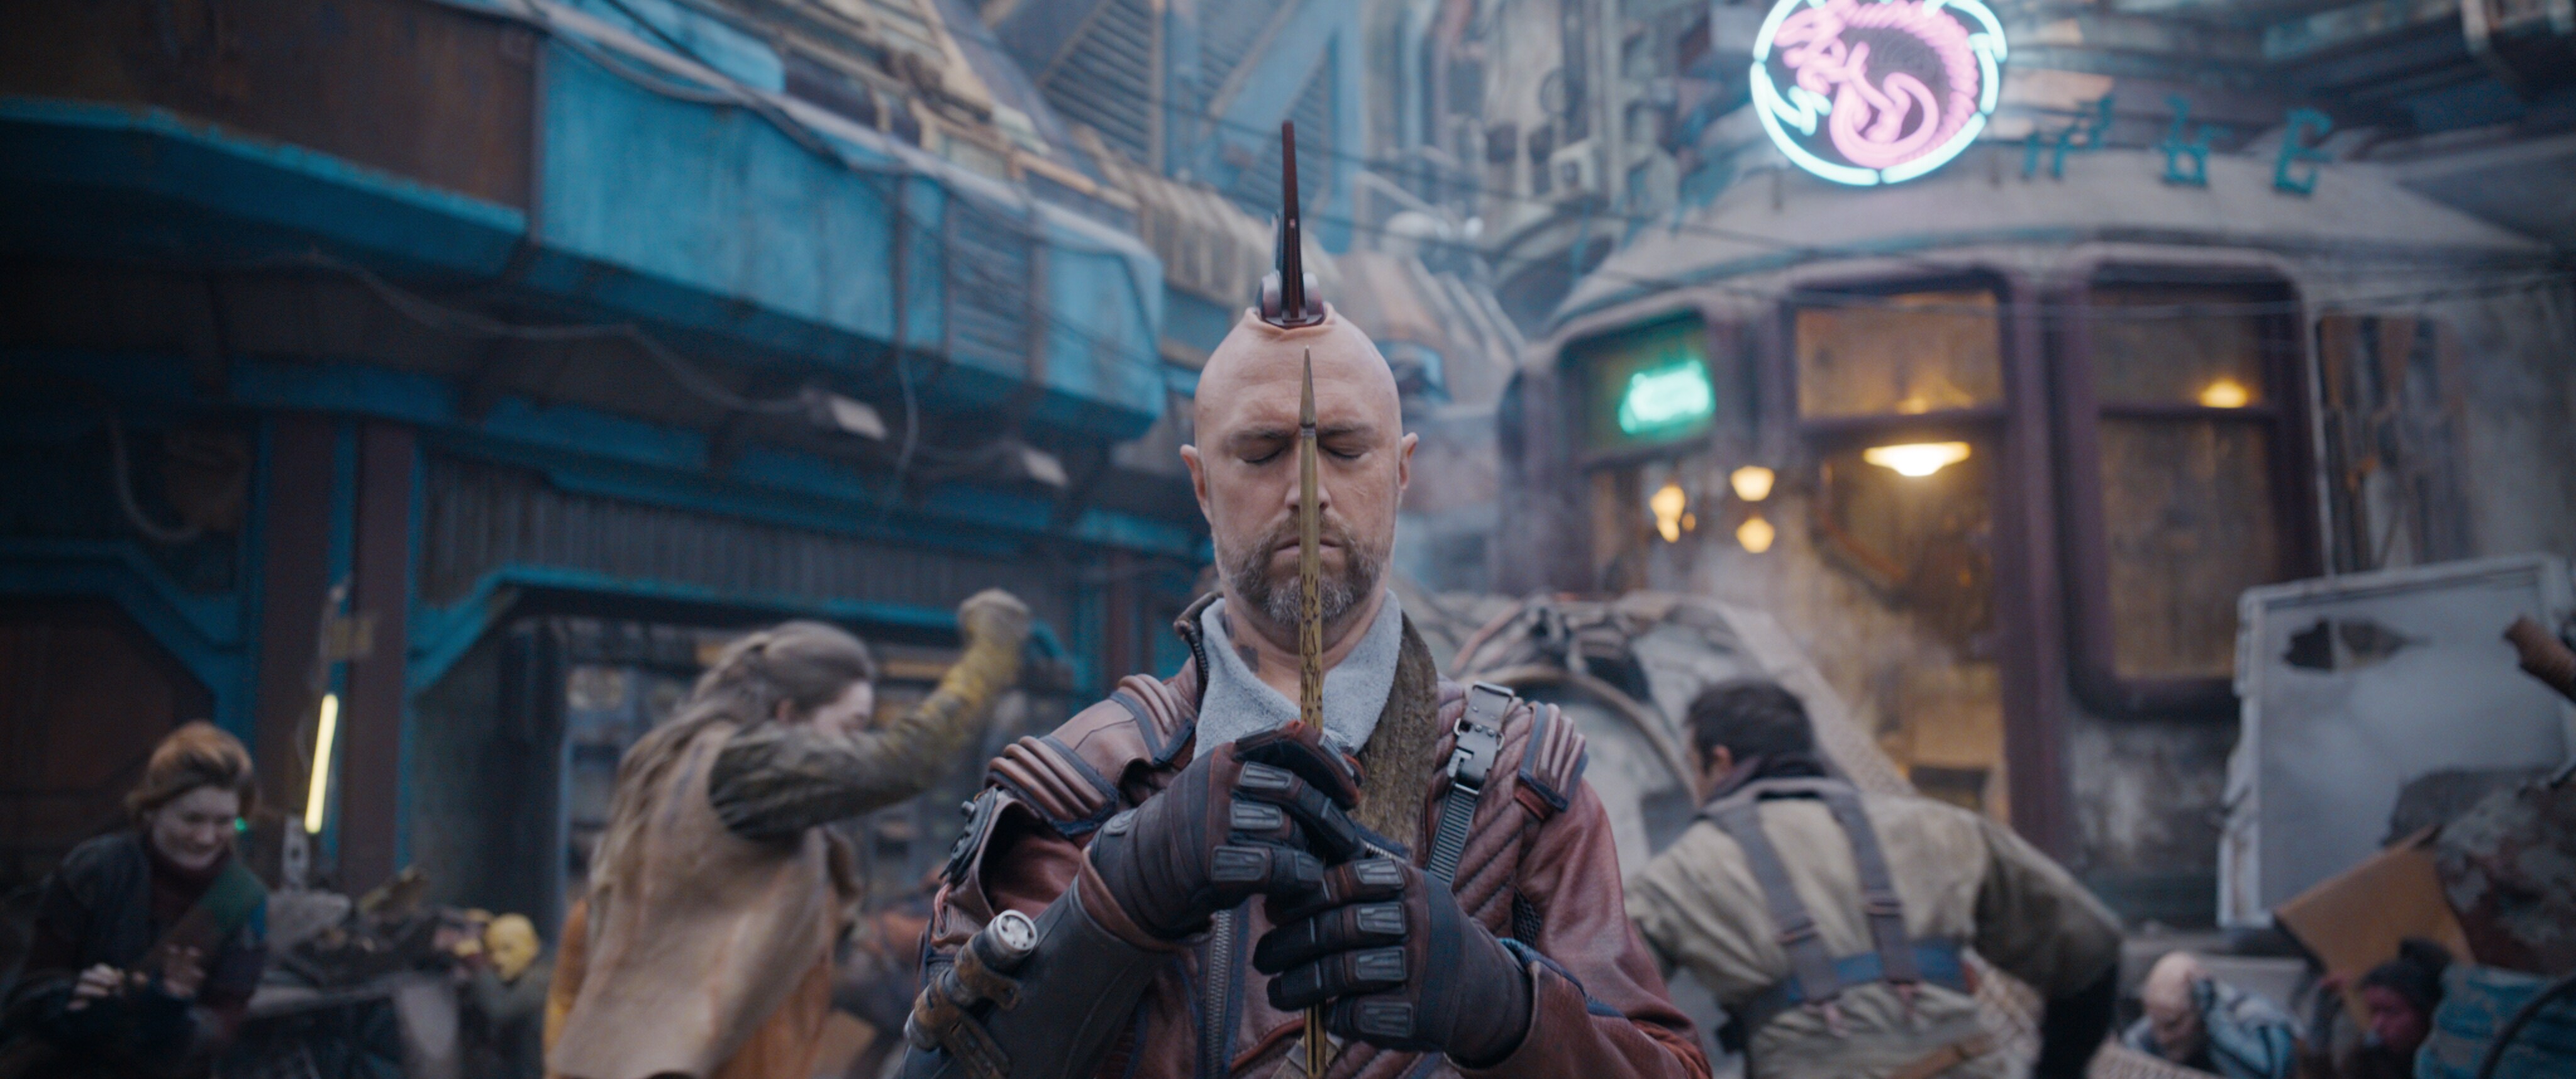 Kraglin, eyes closed, focuses on the arrow he holds in front of him